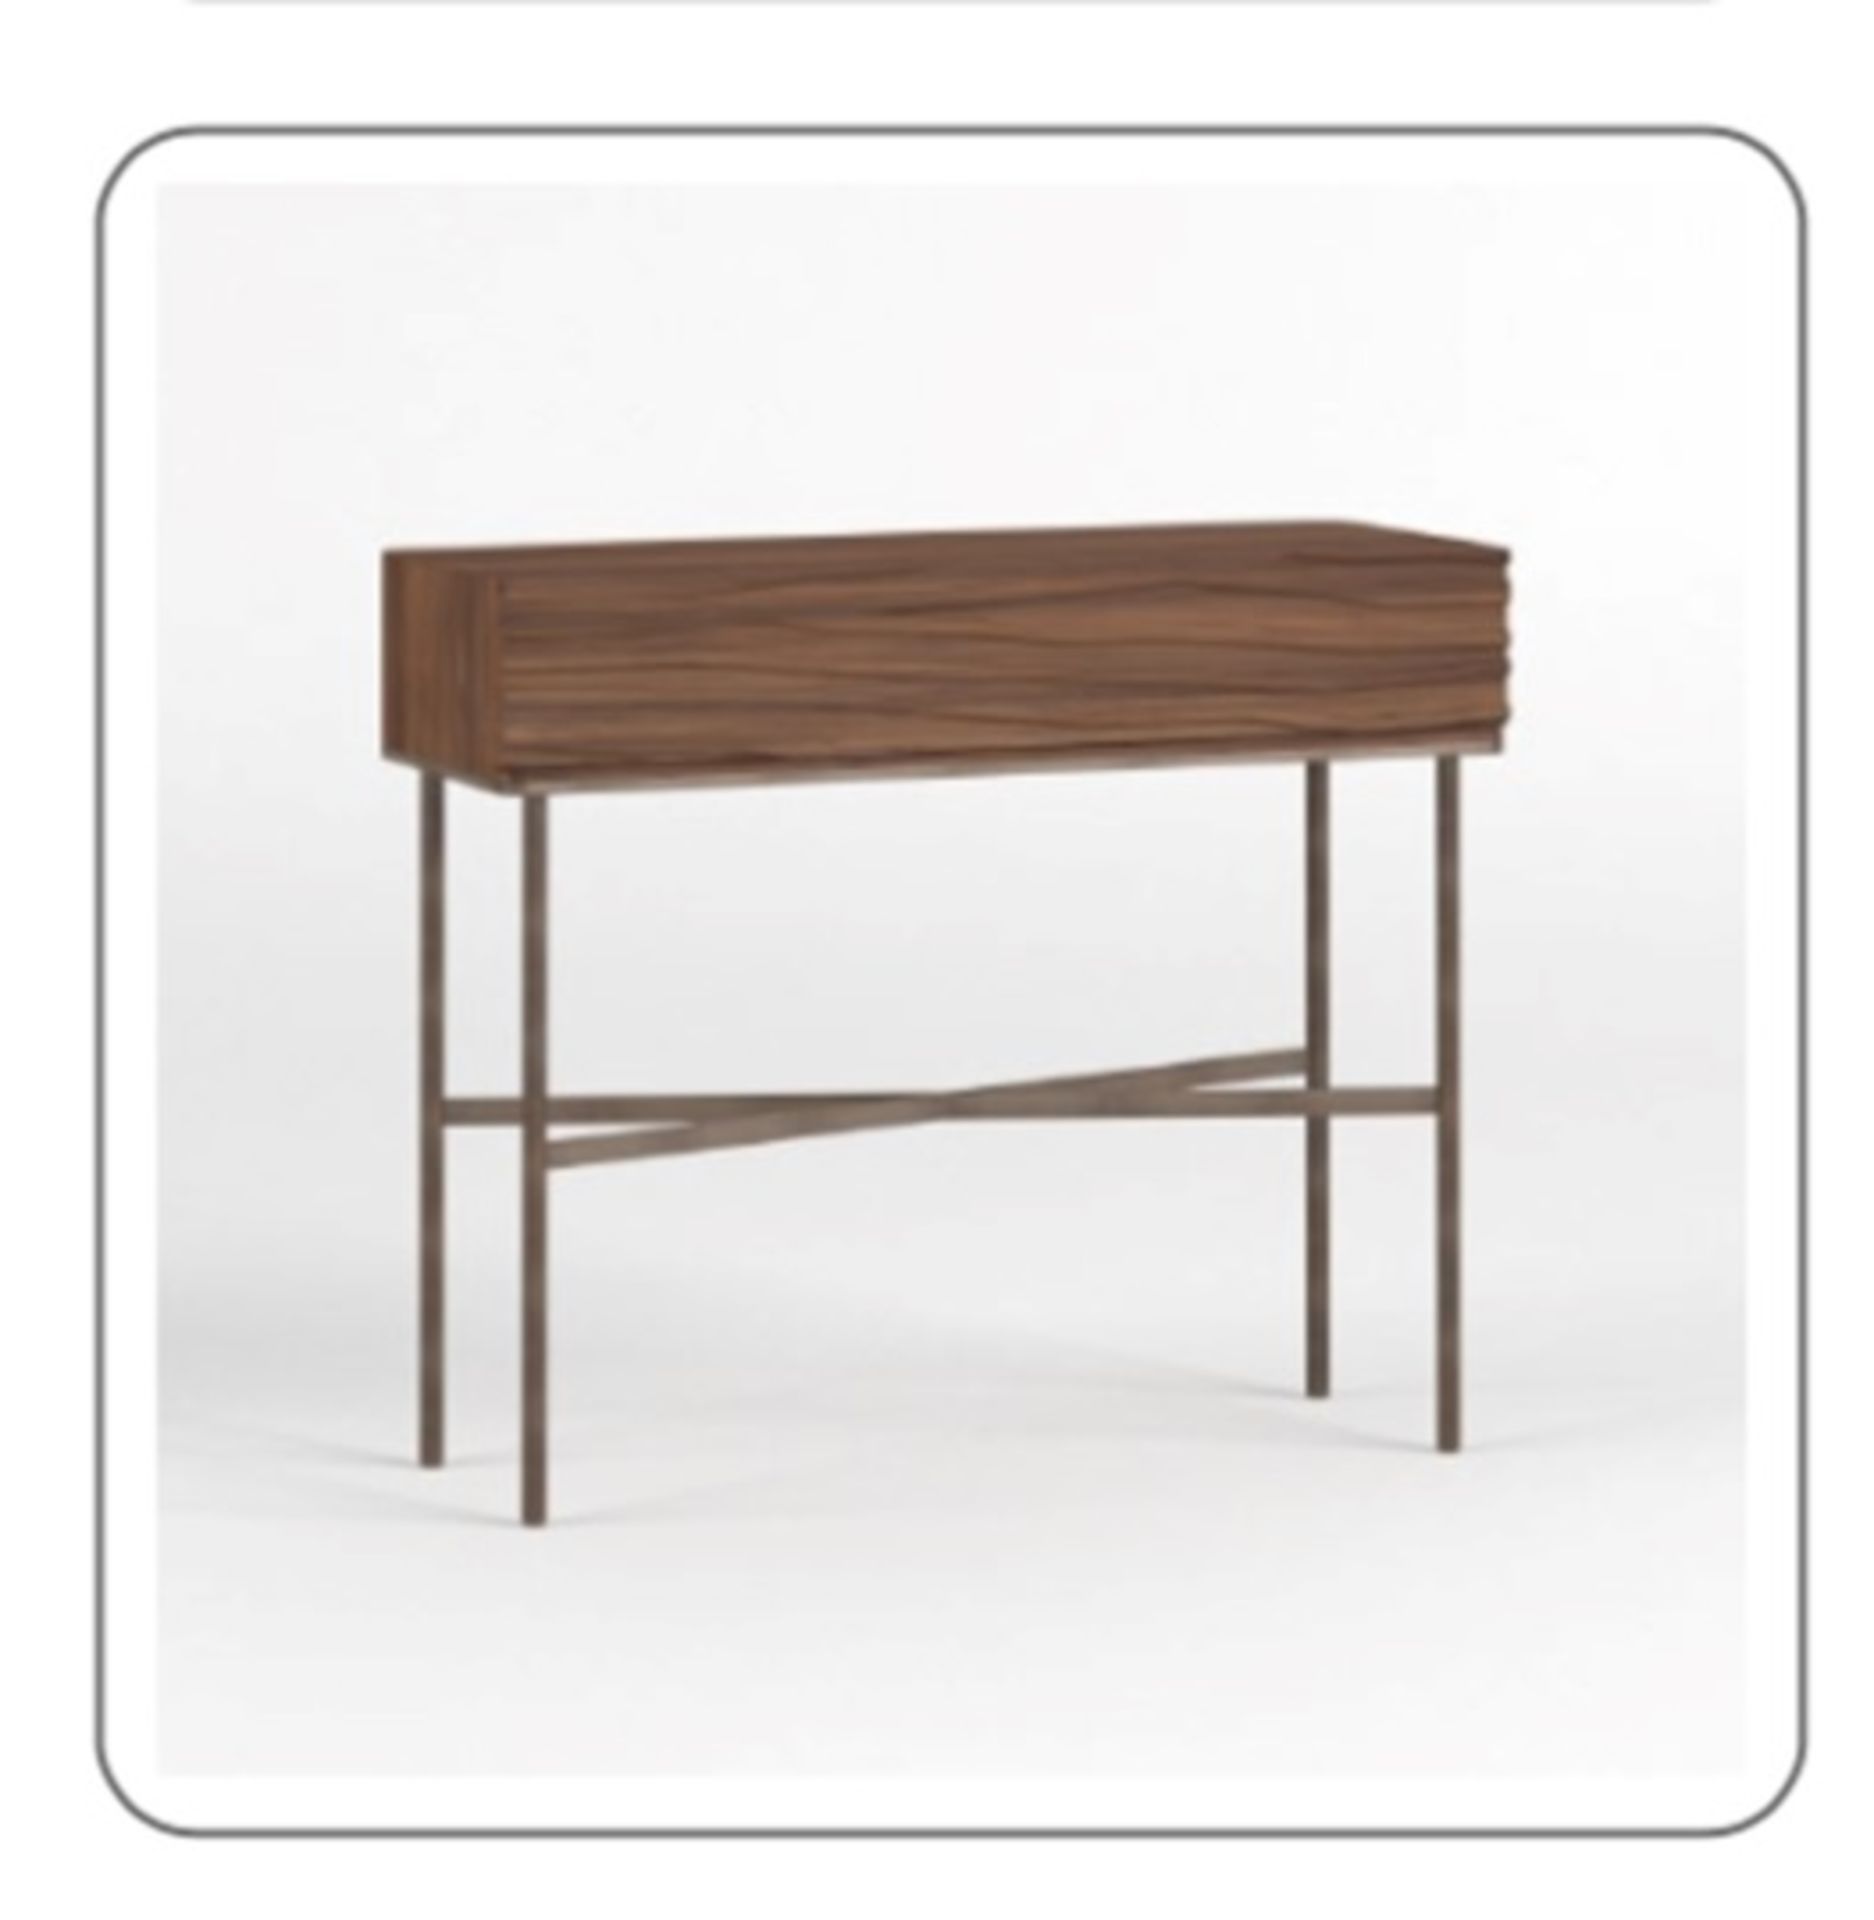 Benwest Console Table Inspired By The Art Of Joinery, The Walnut Console Is A Fusion Of - Bild 2 aus 2